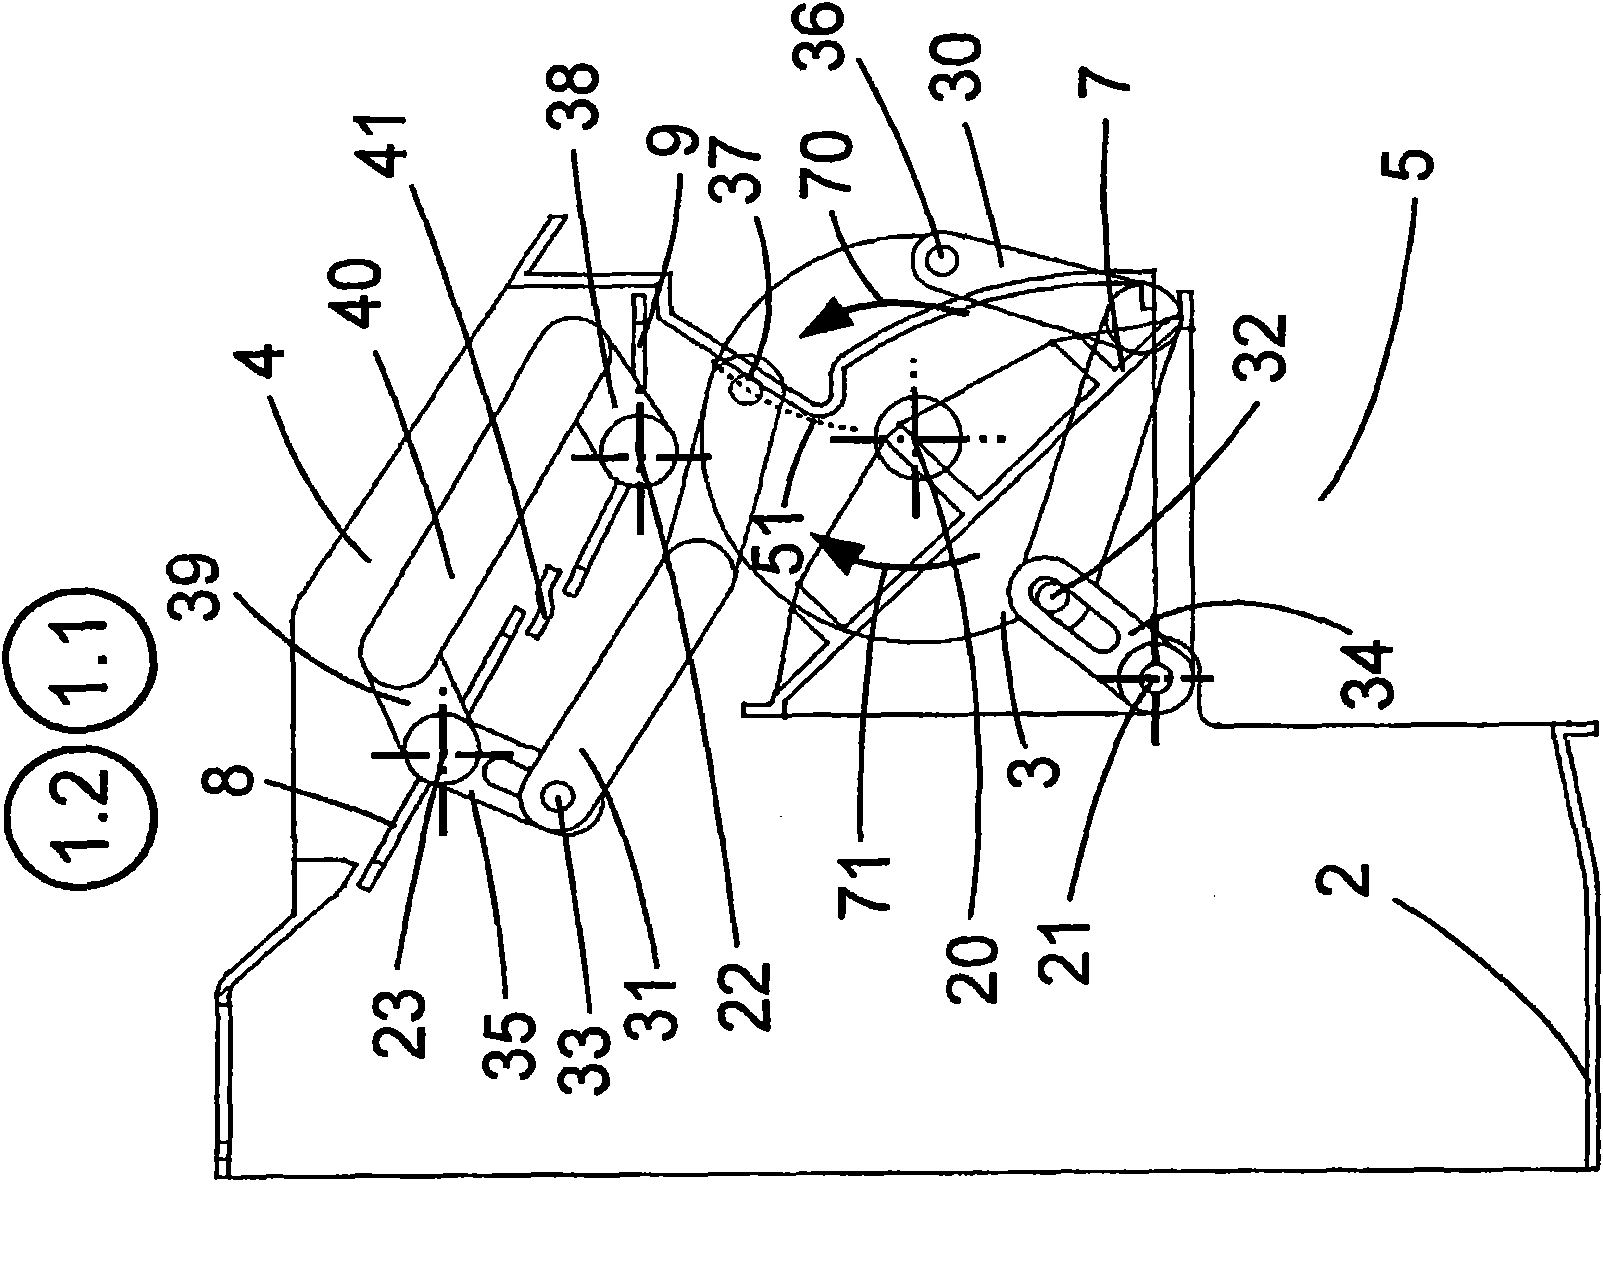 Device for controlling air flows